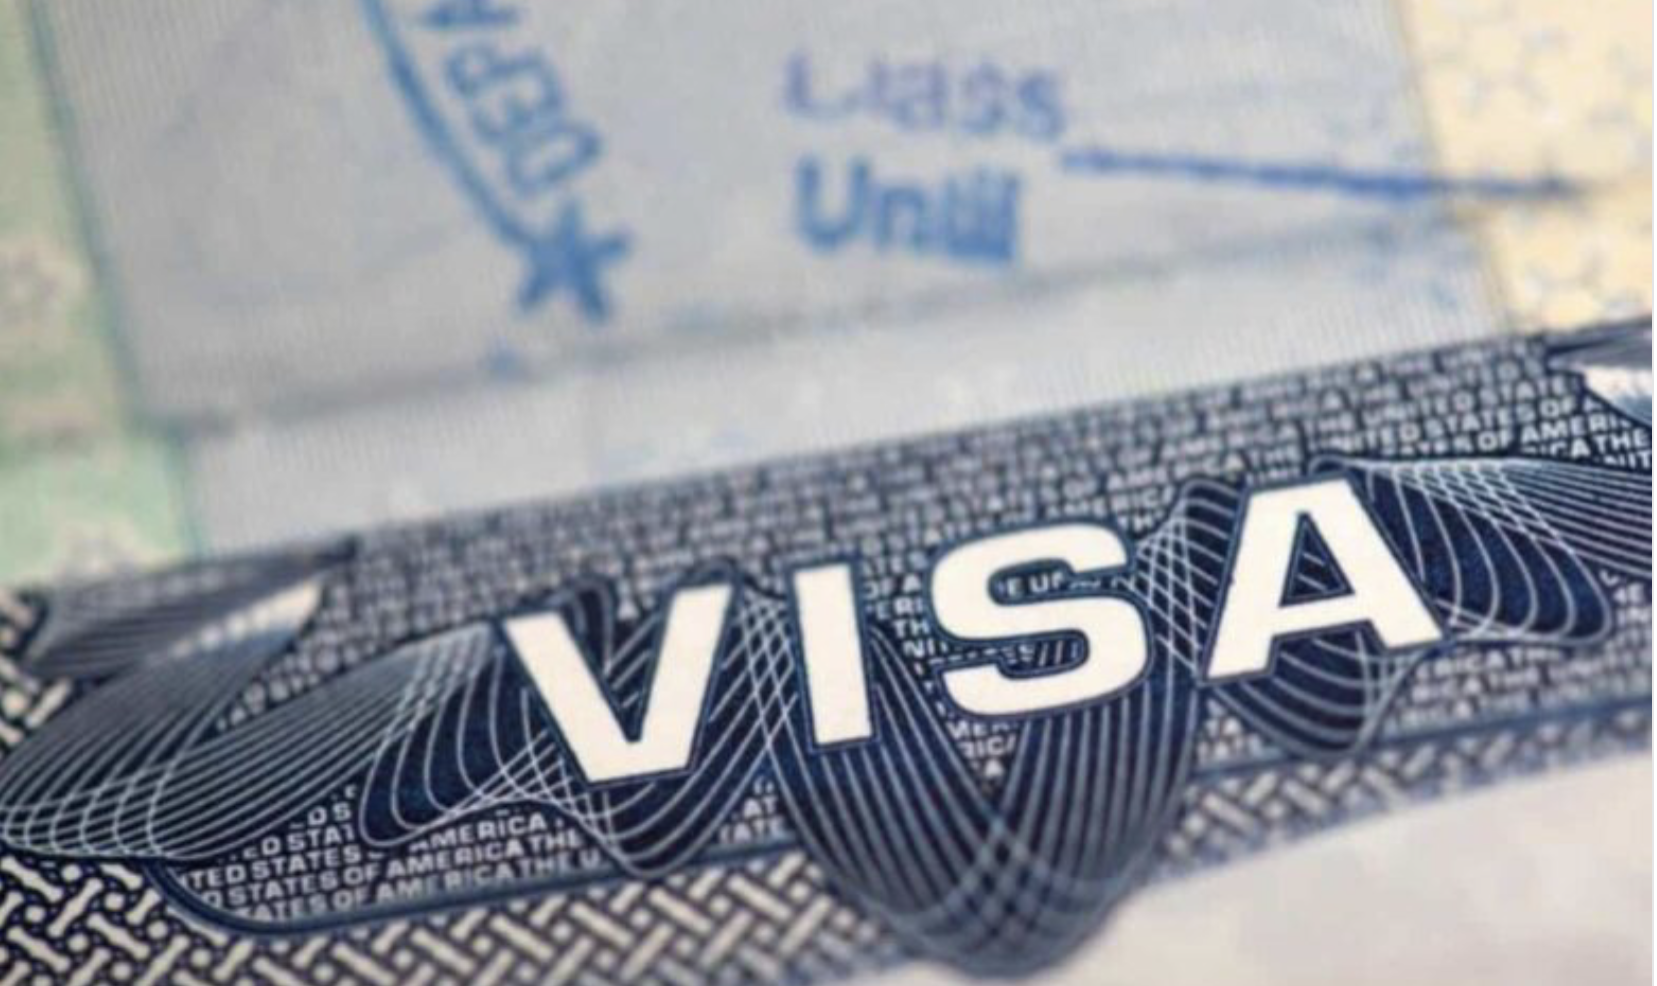 Cost of USA visa slot booking for students